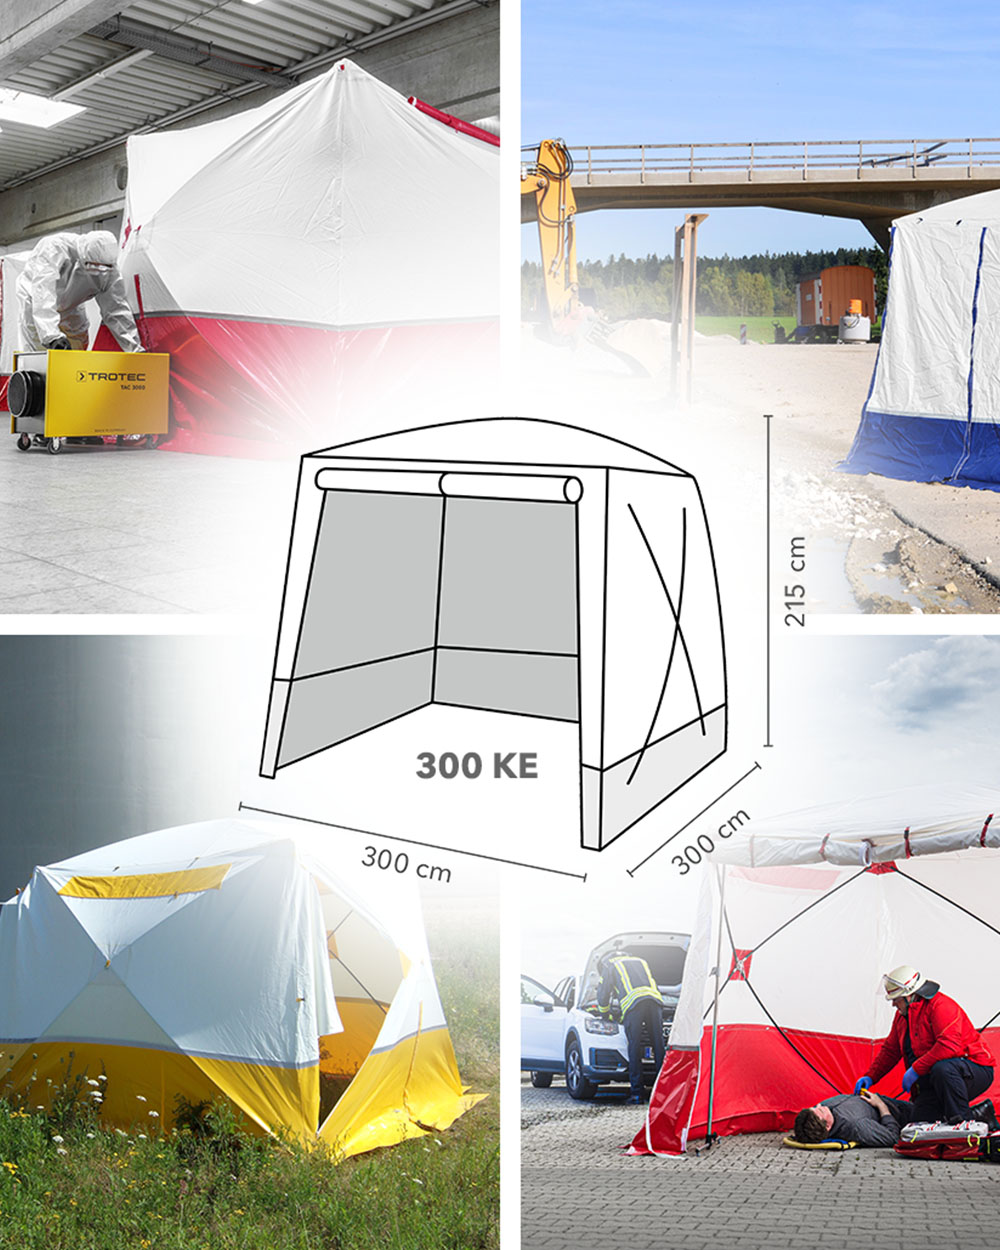 Flat-roofed tent 300 KE – universally applicable!